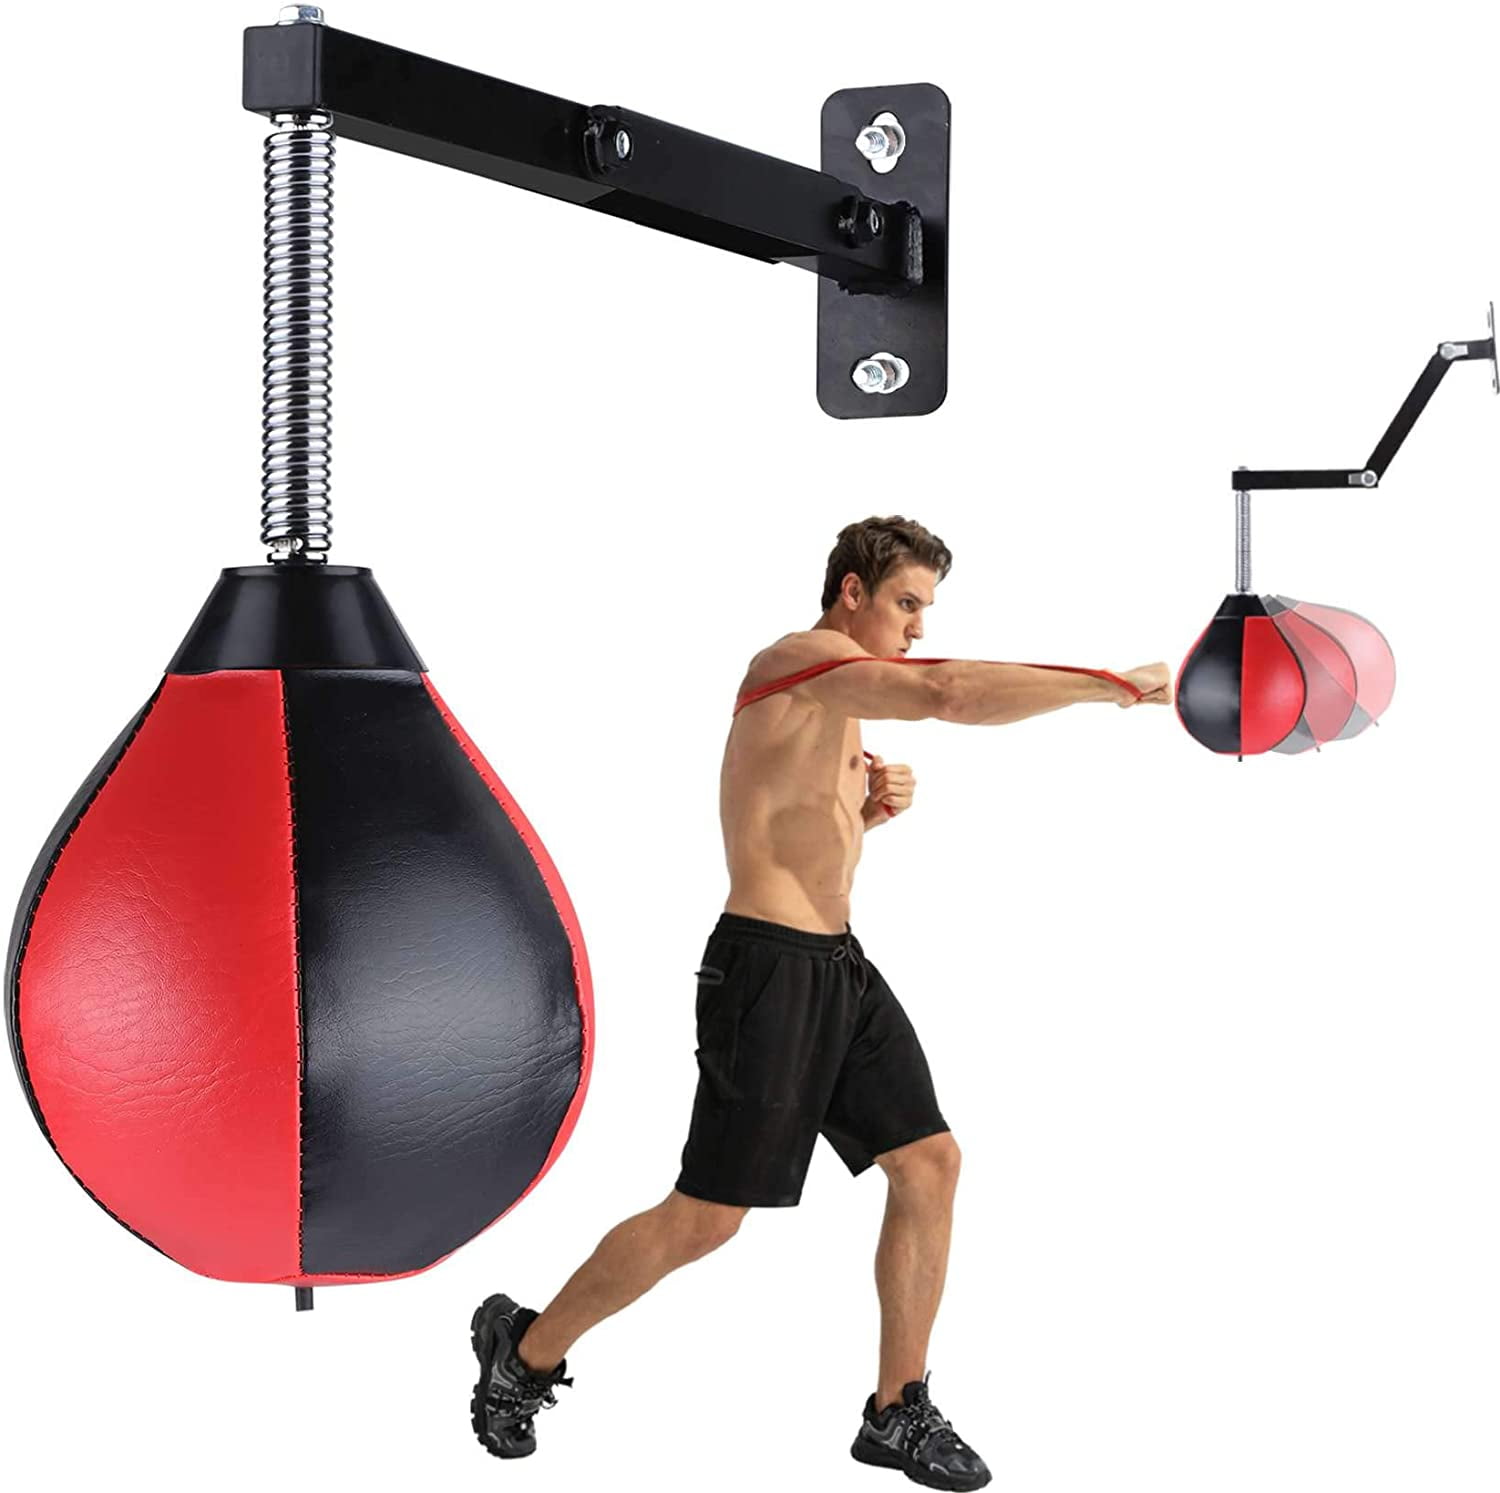 Punch Bag Bracket Wall Mount Heavy Duty Boxing Bag Hanger Punch Focus Speed Stands Steel Frame Ceiling Hook Rack MMA Training Home Gym Excersice Fitness Hand Wraps Men Women Bandages Gift